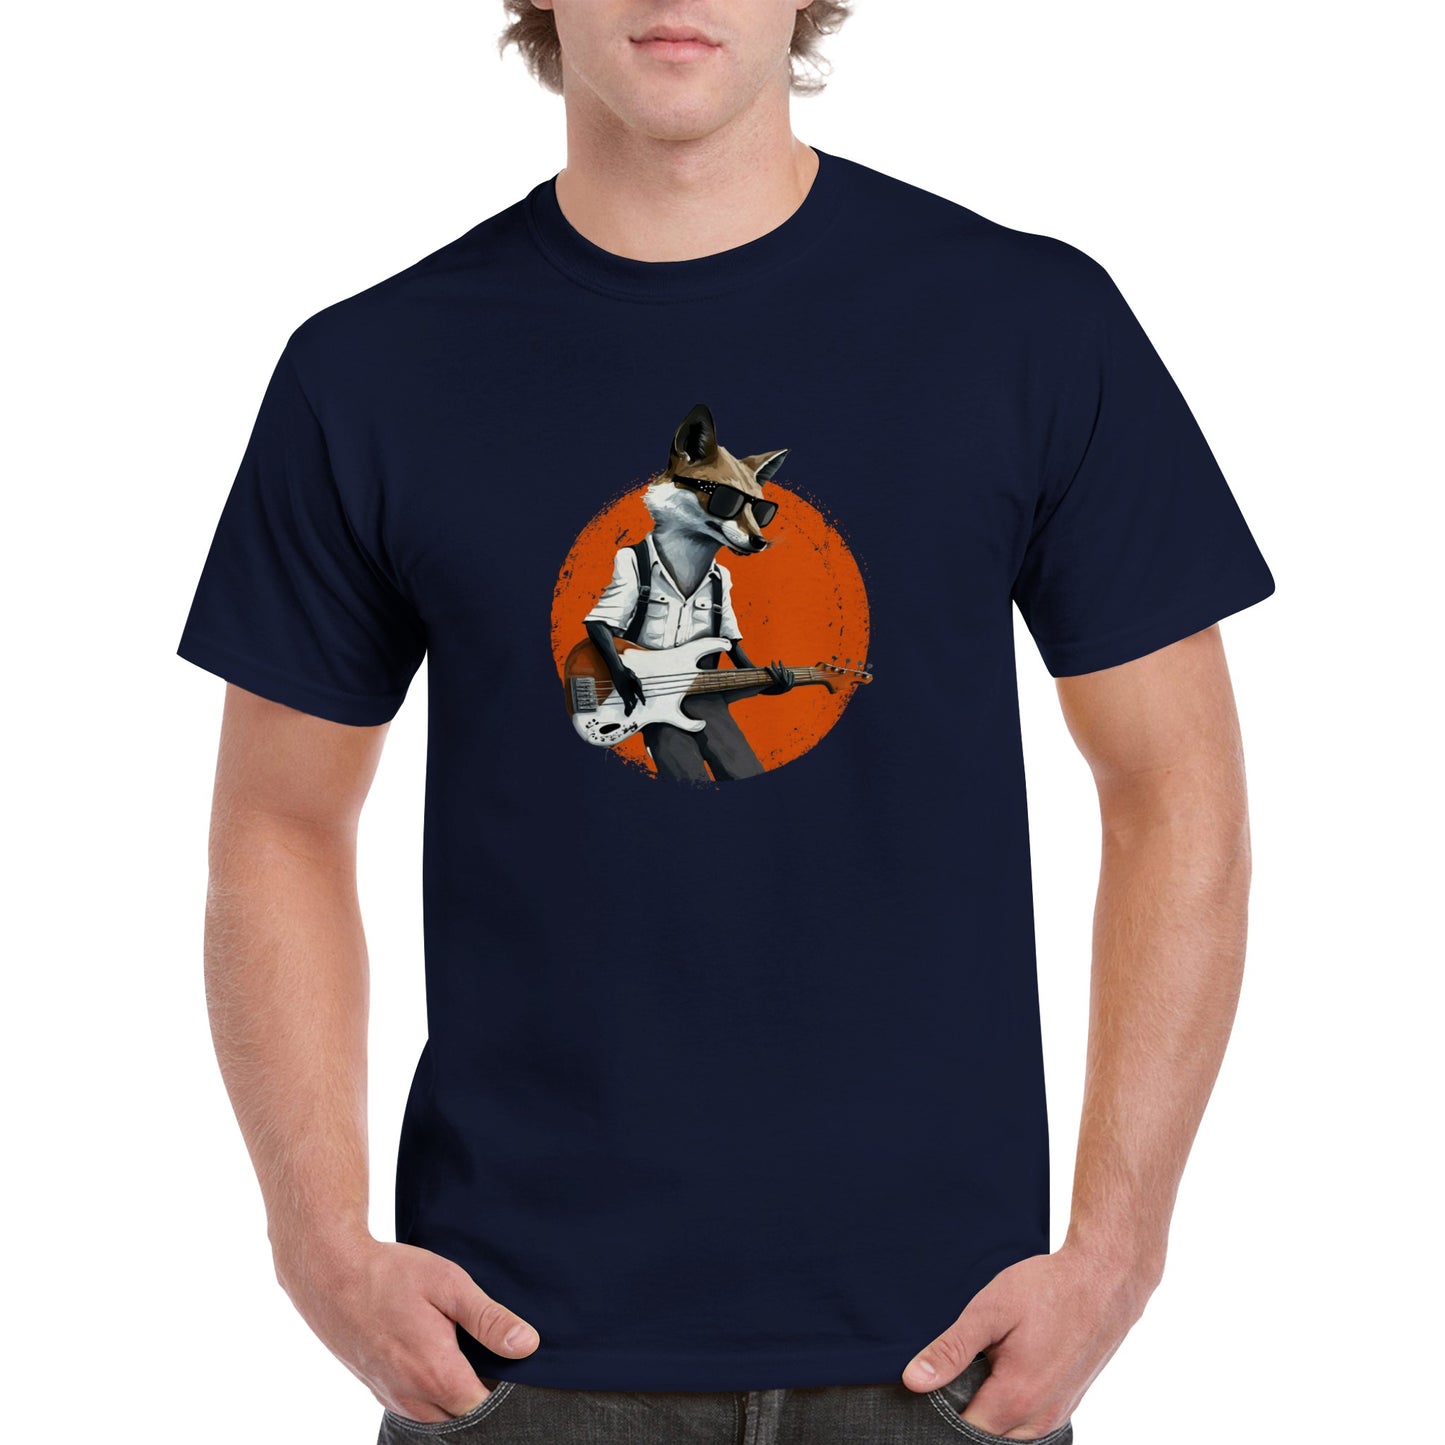 Guy wearing a navy blue t-shirt with a print of a fox in sunglasses playing the bass guitar